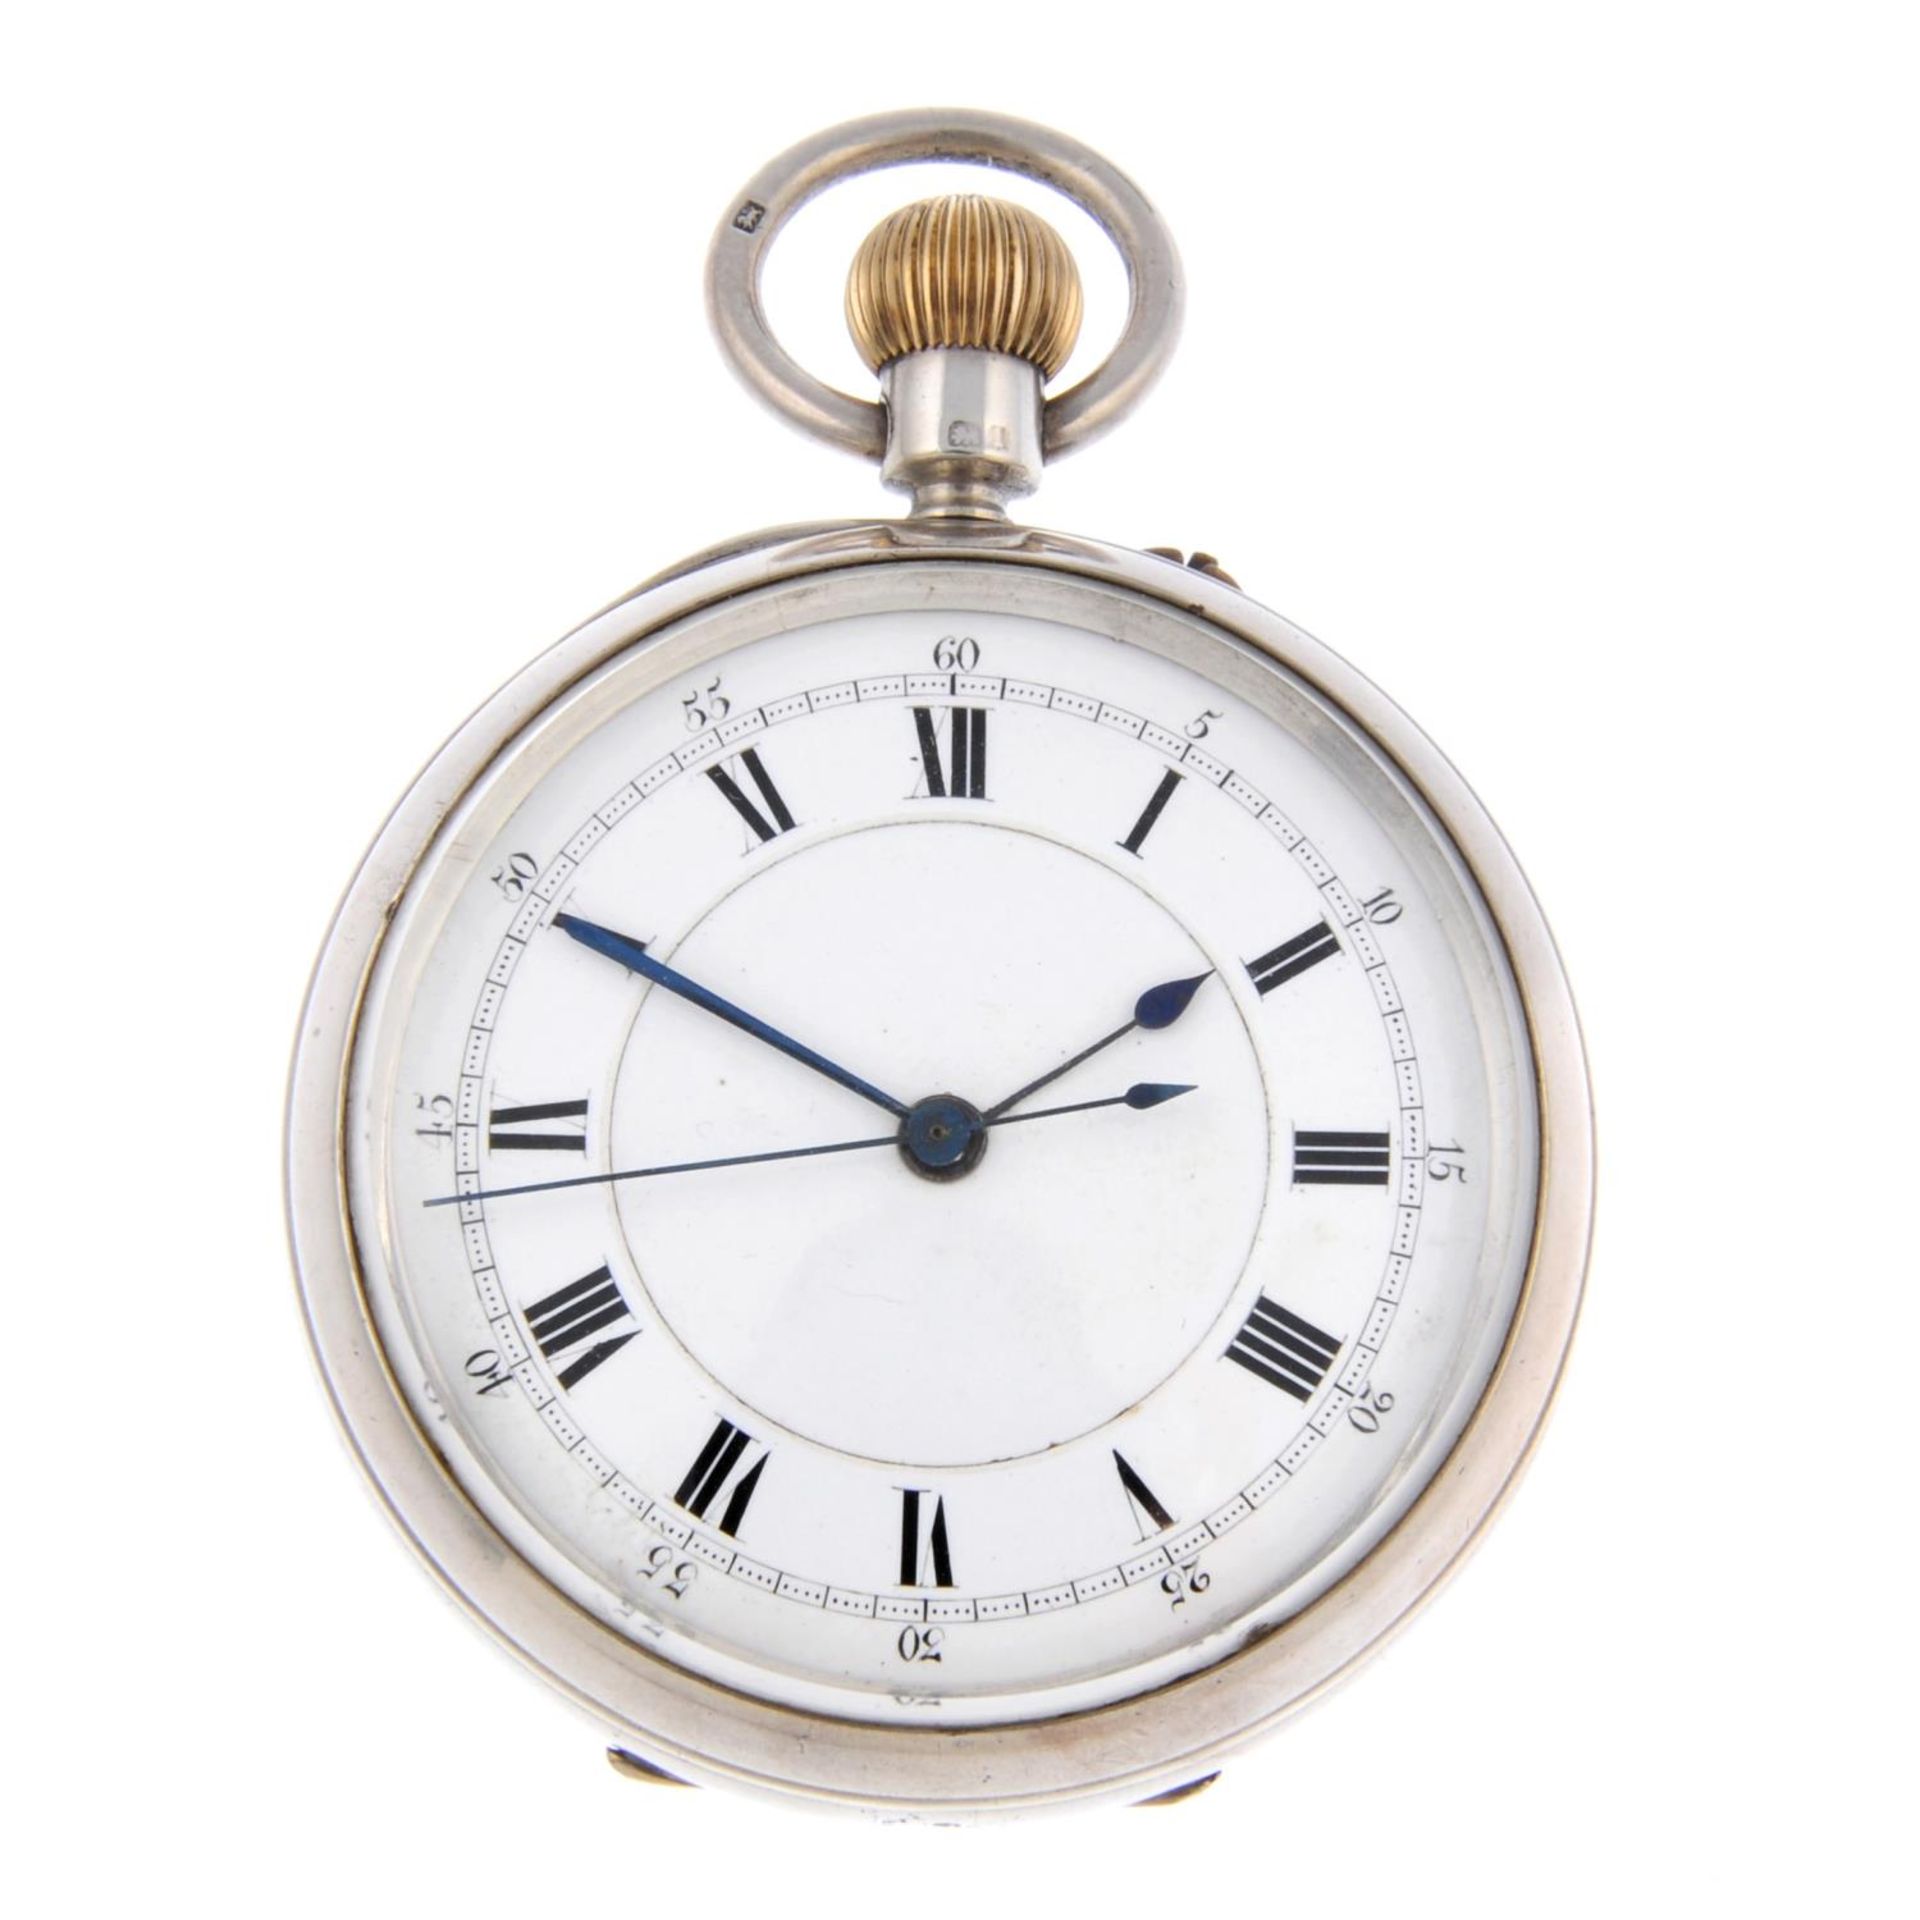 An open face centre seconds pocket watch by Asher & Cole.